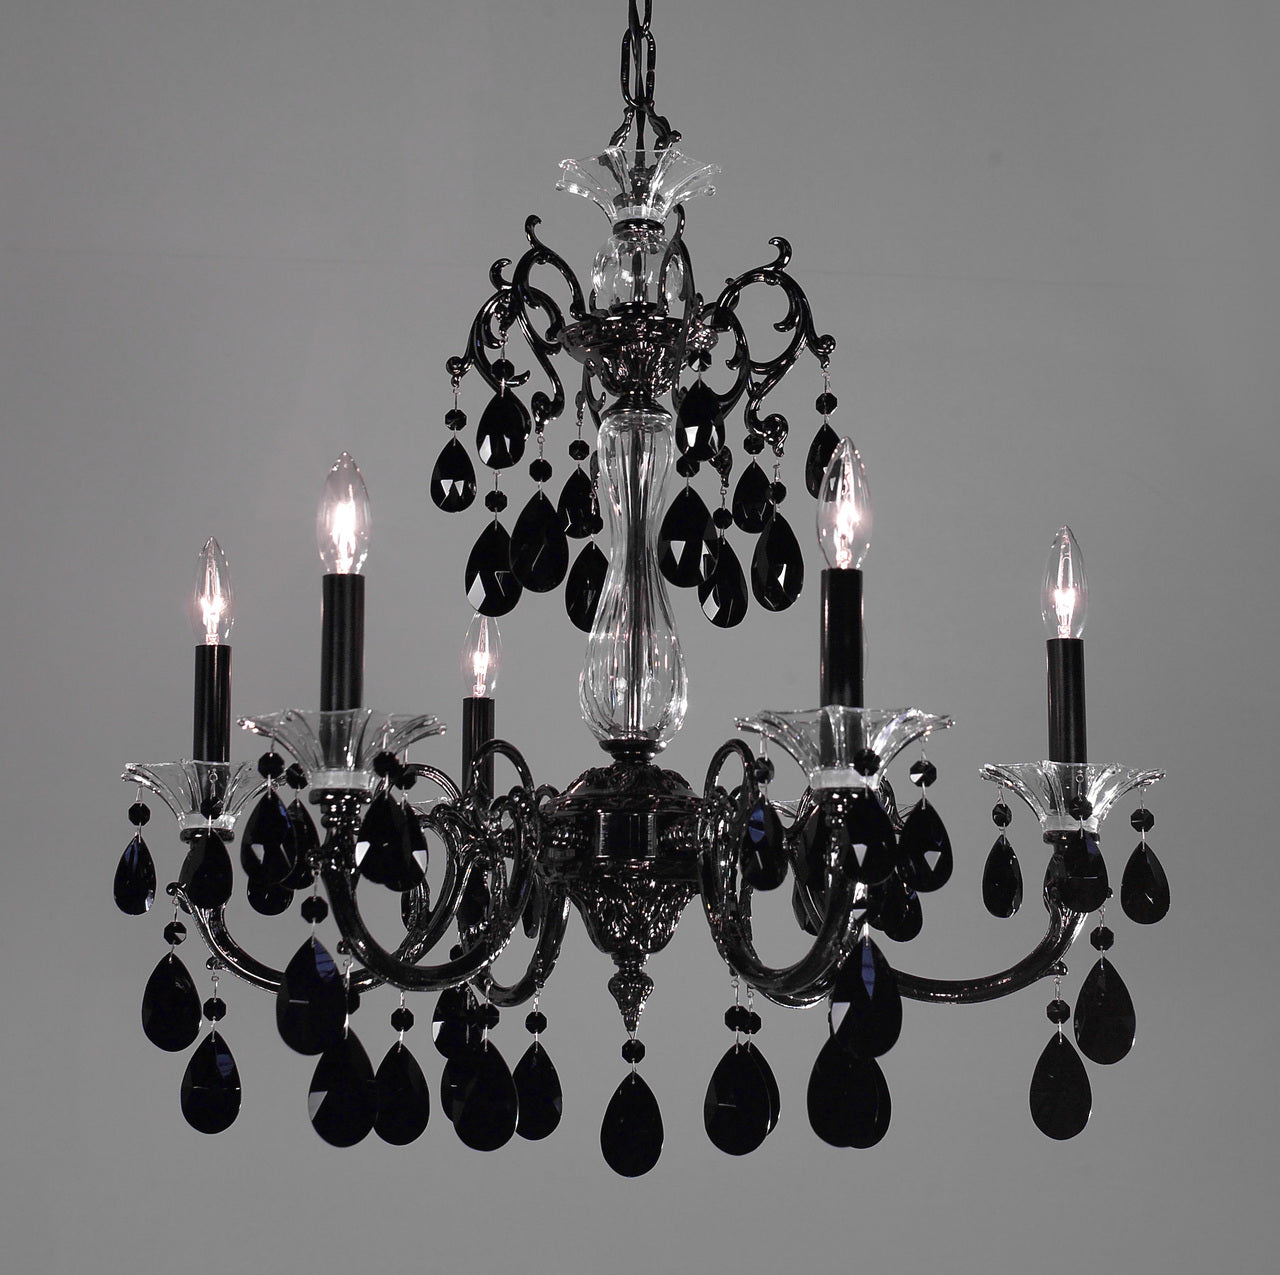 Classic Lighting 57056 G SJT Via Lombardi Crystal Chandelier in 24k Gold (Imported from Spain)